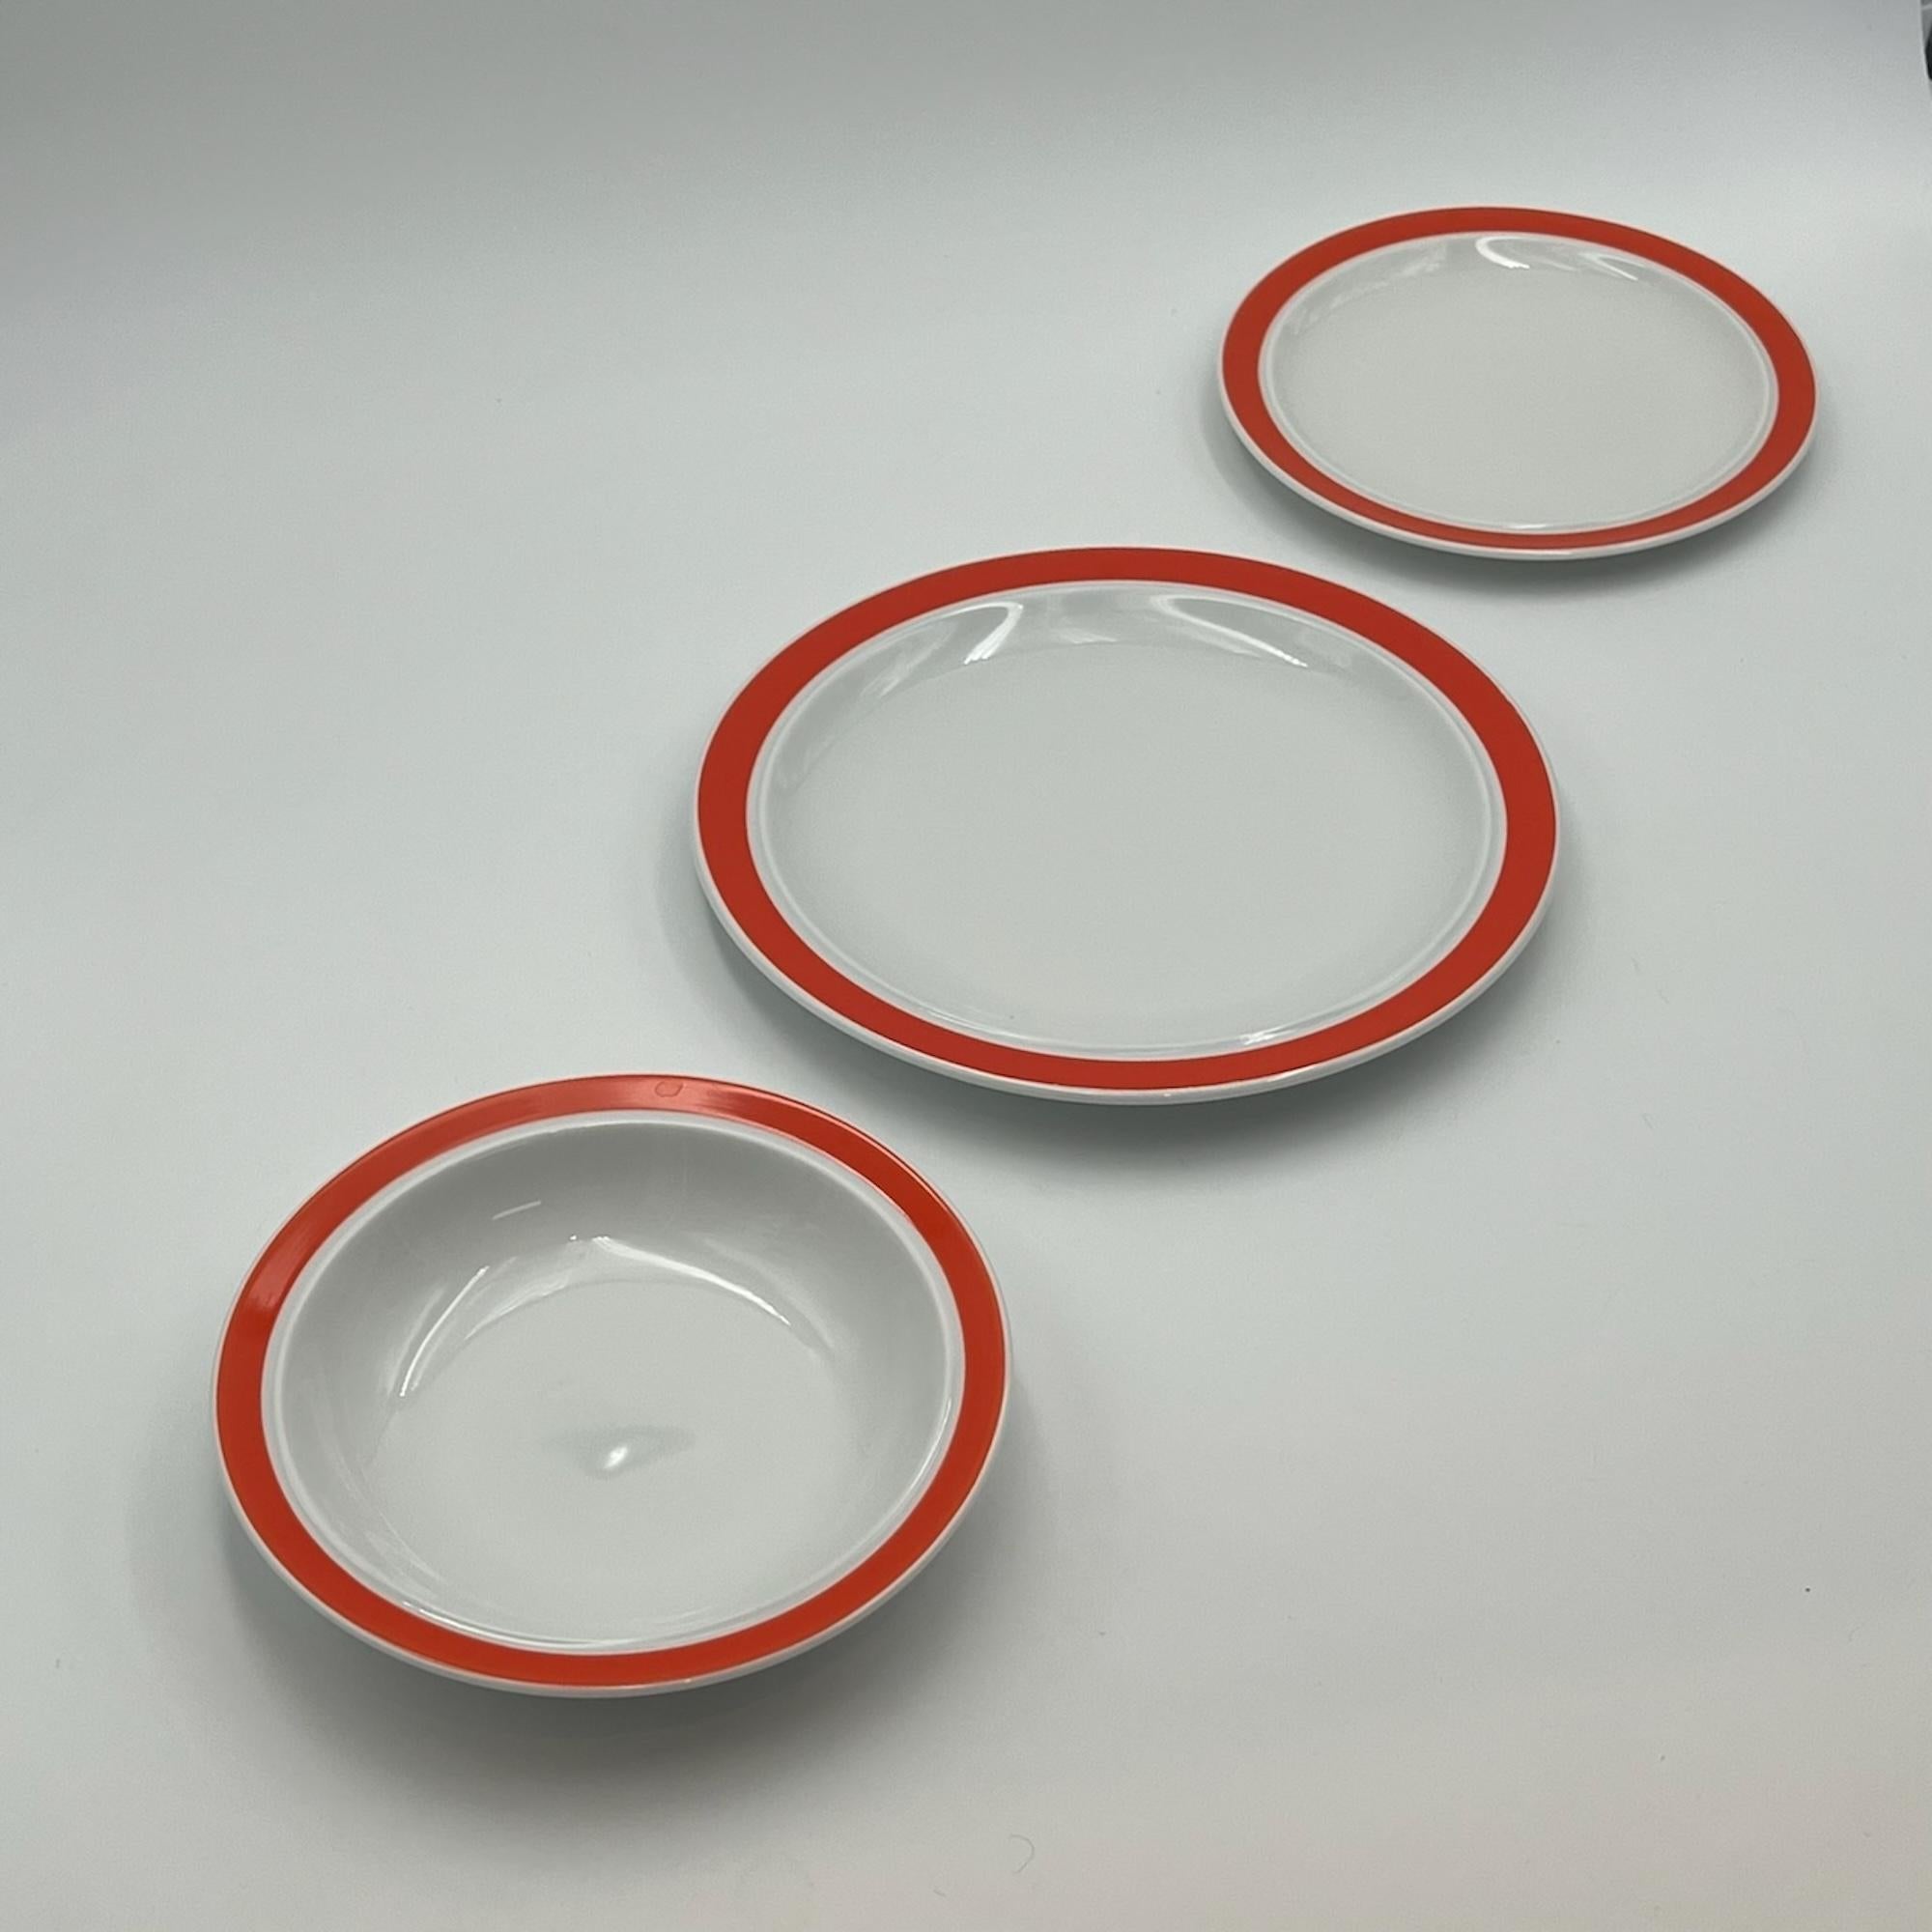 Space Age Vintage Rare 1970s Thomas Rosenthal Tableware Set from West Germany For Sale